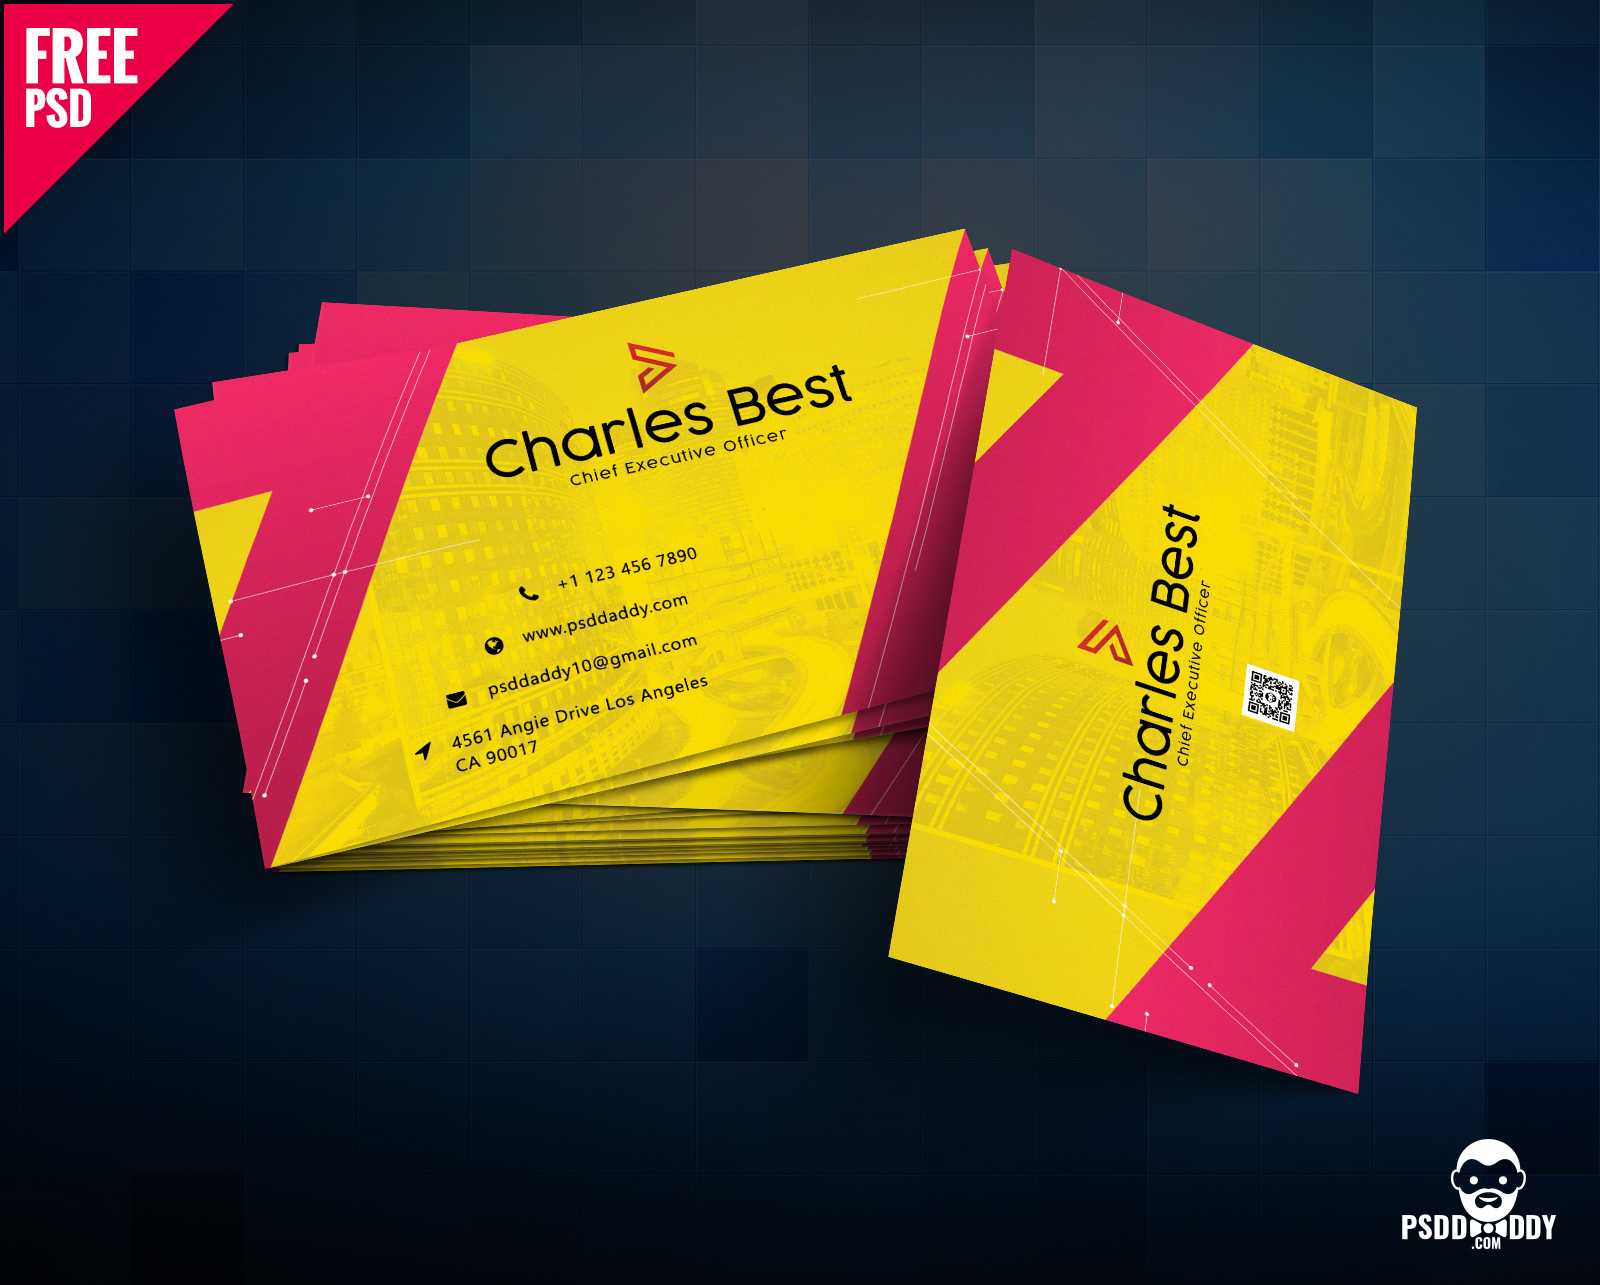 Download] Creative Business Card Free Psd | Psddaddy For Name Card Photoshop Template